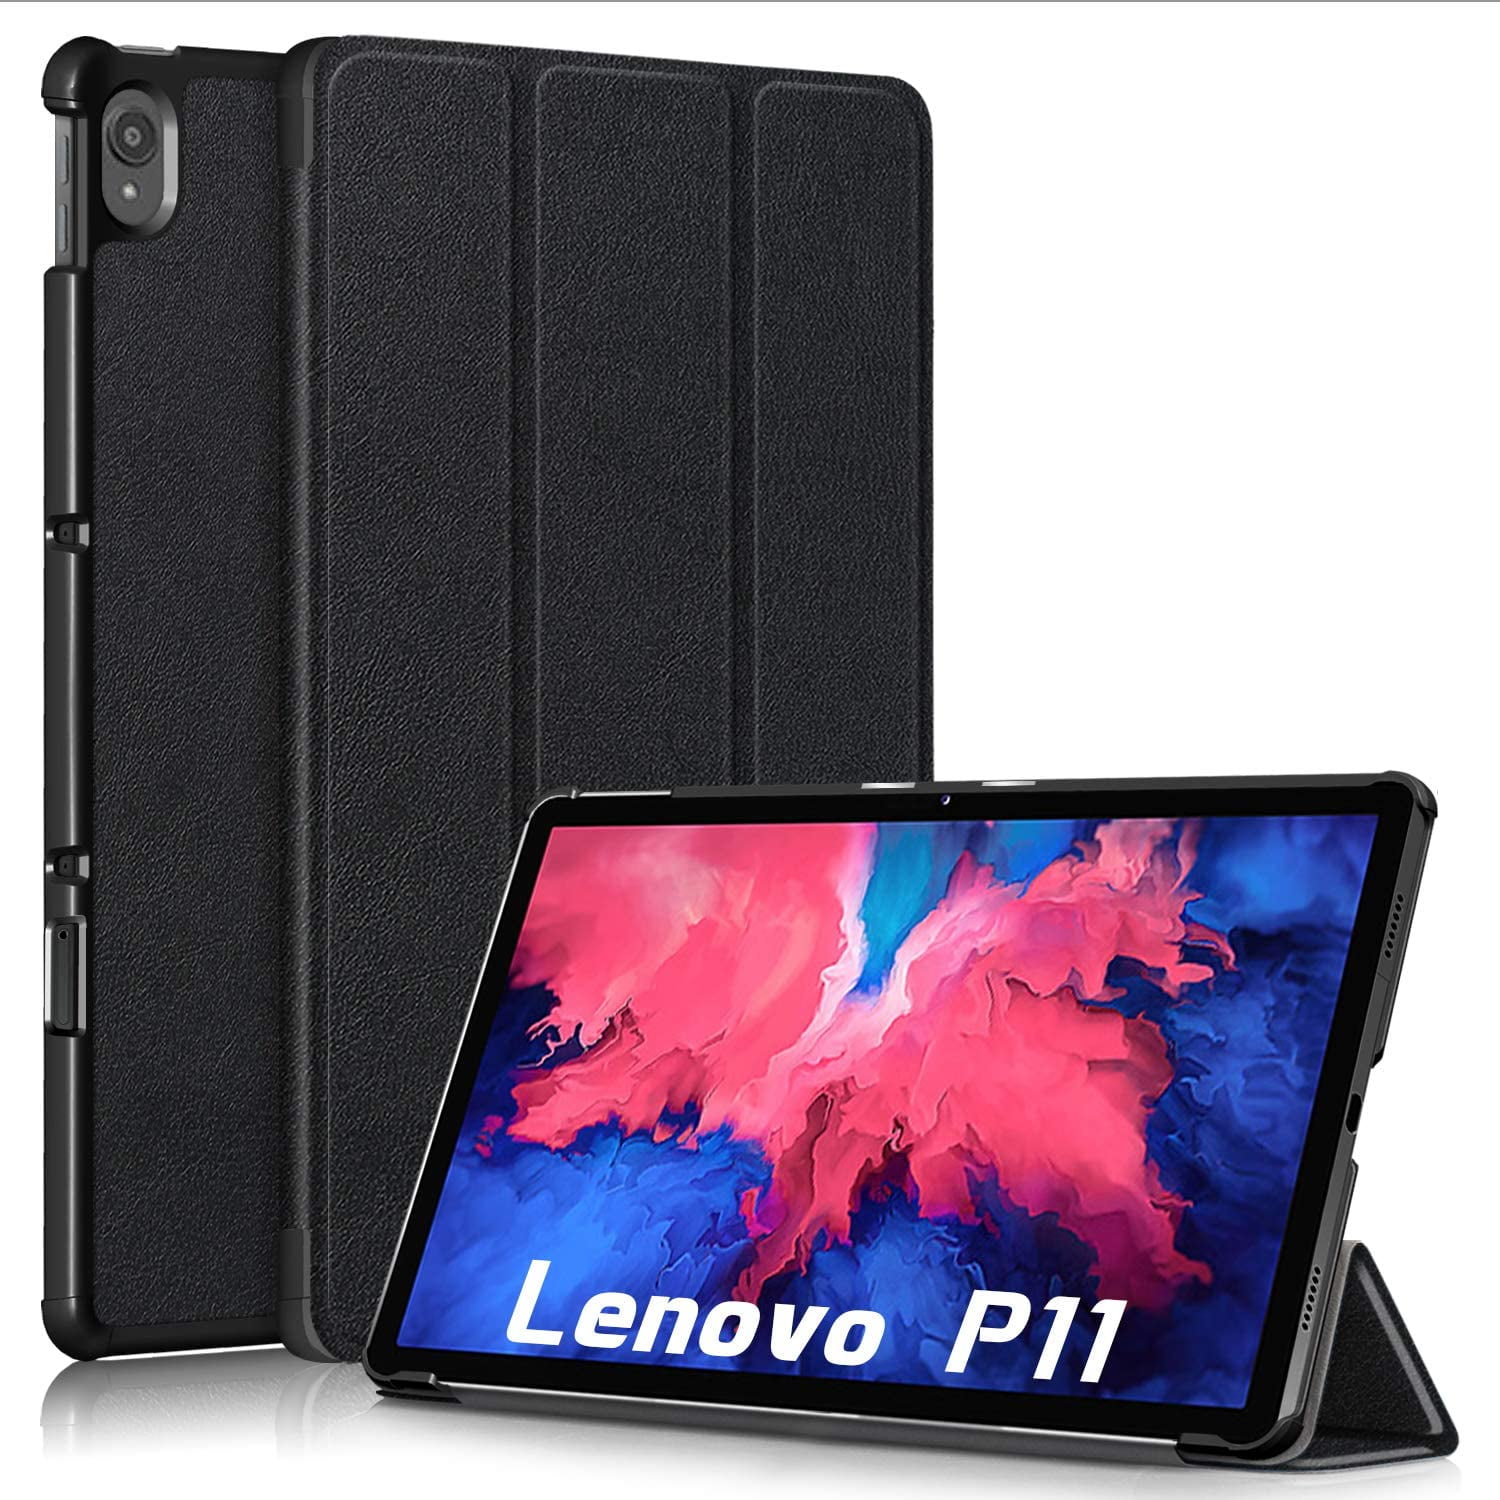 QYiD Keyboard Case for Lenovo Tab P11 11-inch Full HD Tablet 2020 Release Model: TB-J606F TB-J606X Black Leather Stand Case Cover with Magnetically Detachable Wireless Keyboard